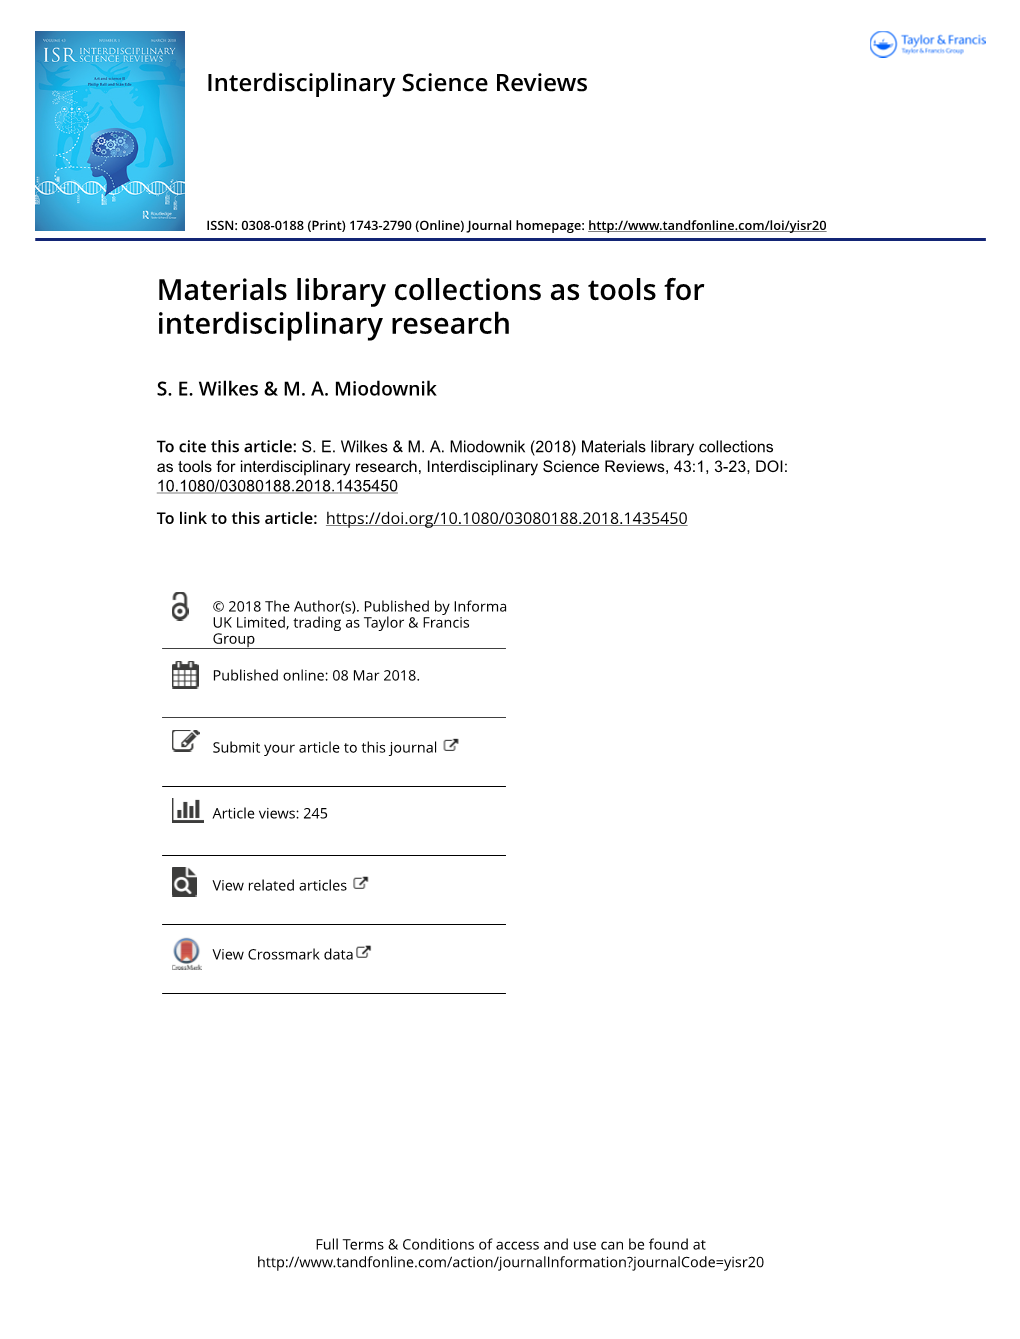 Materials Library Collections As Tools for Interdisciplinary Research